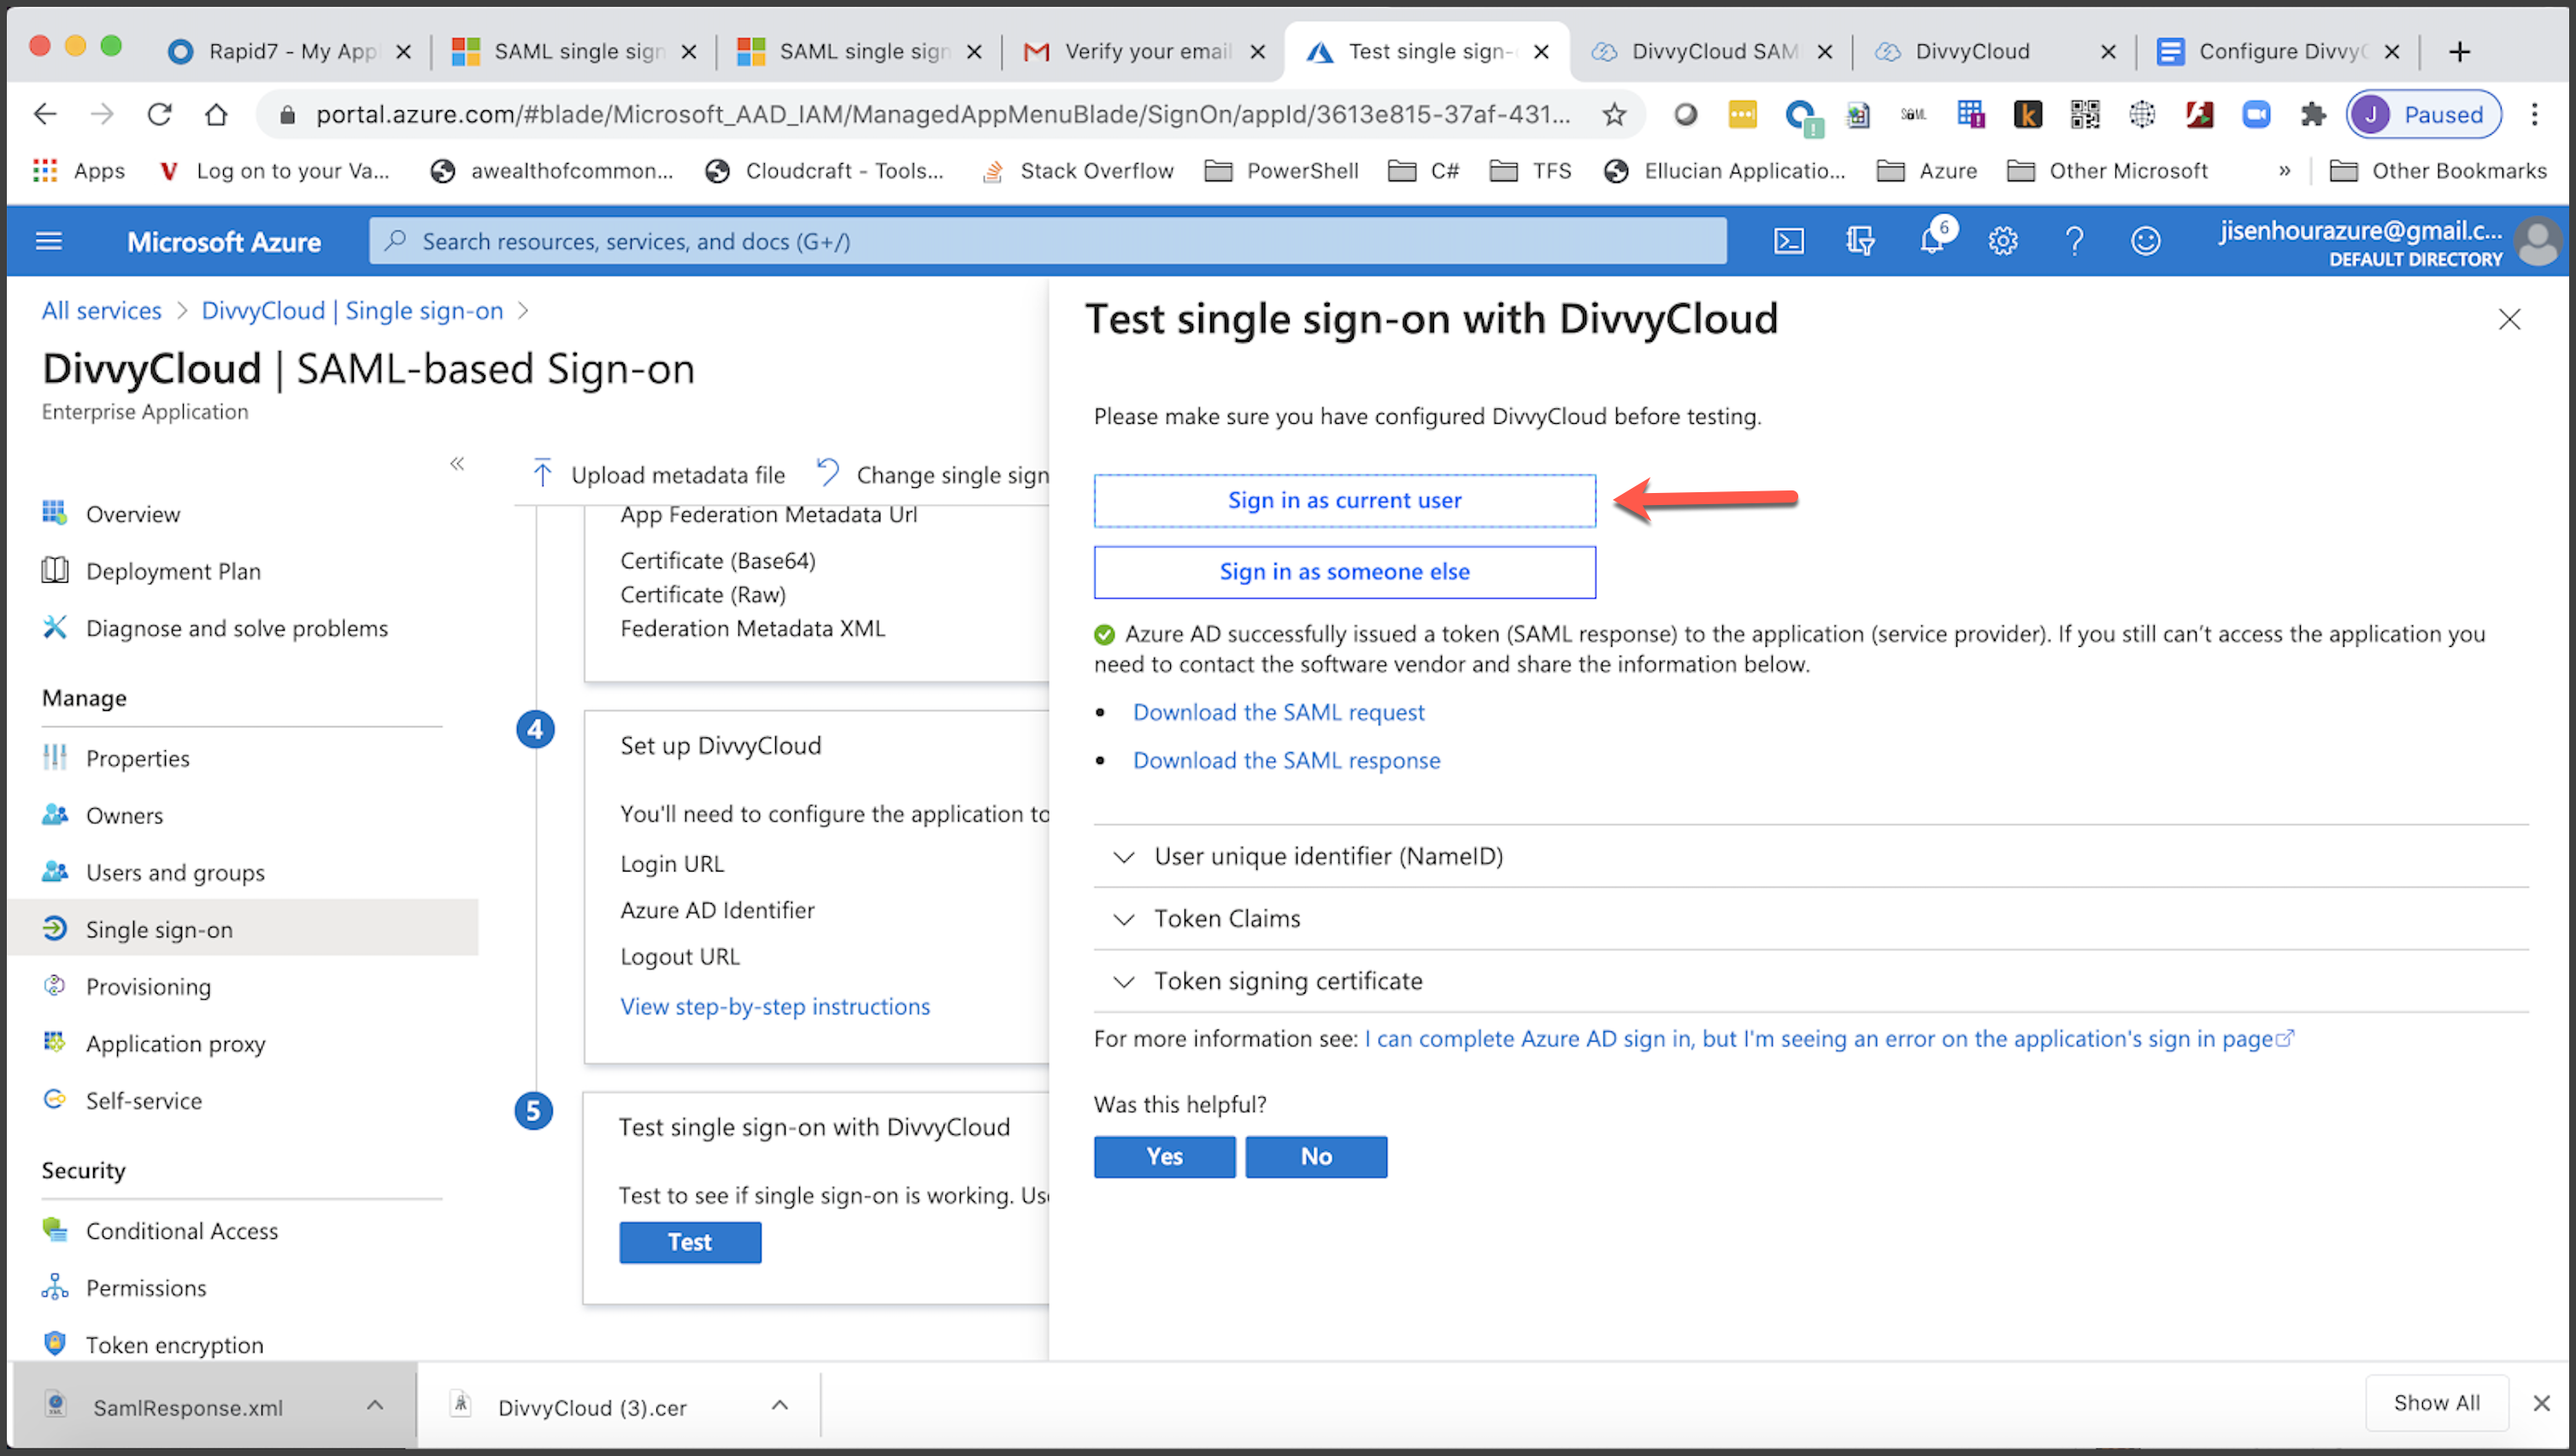 Azure Console - Sign in as Current User Interface